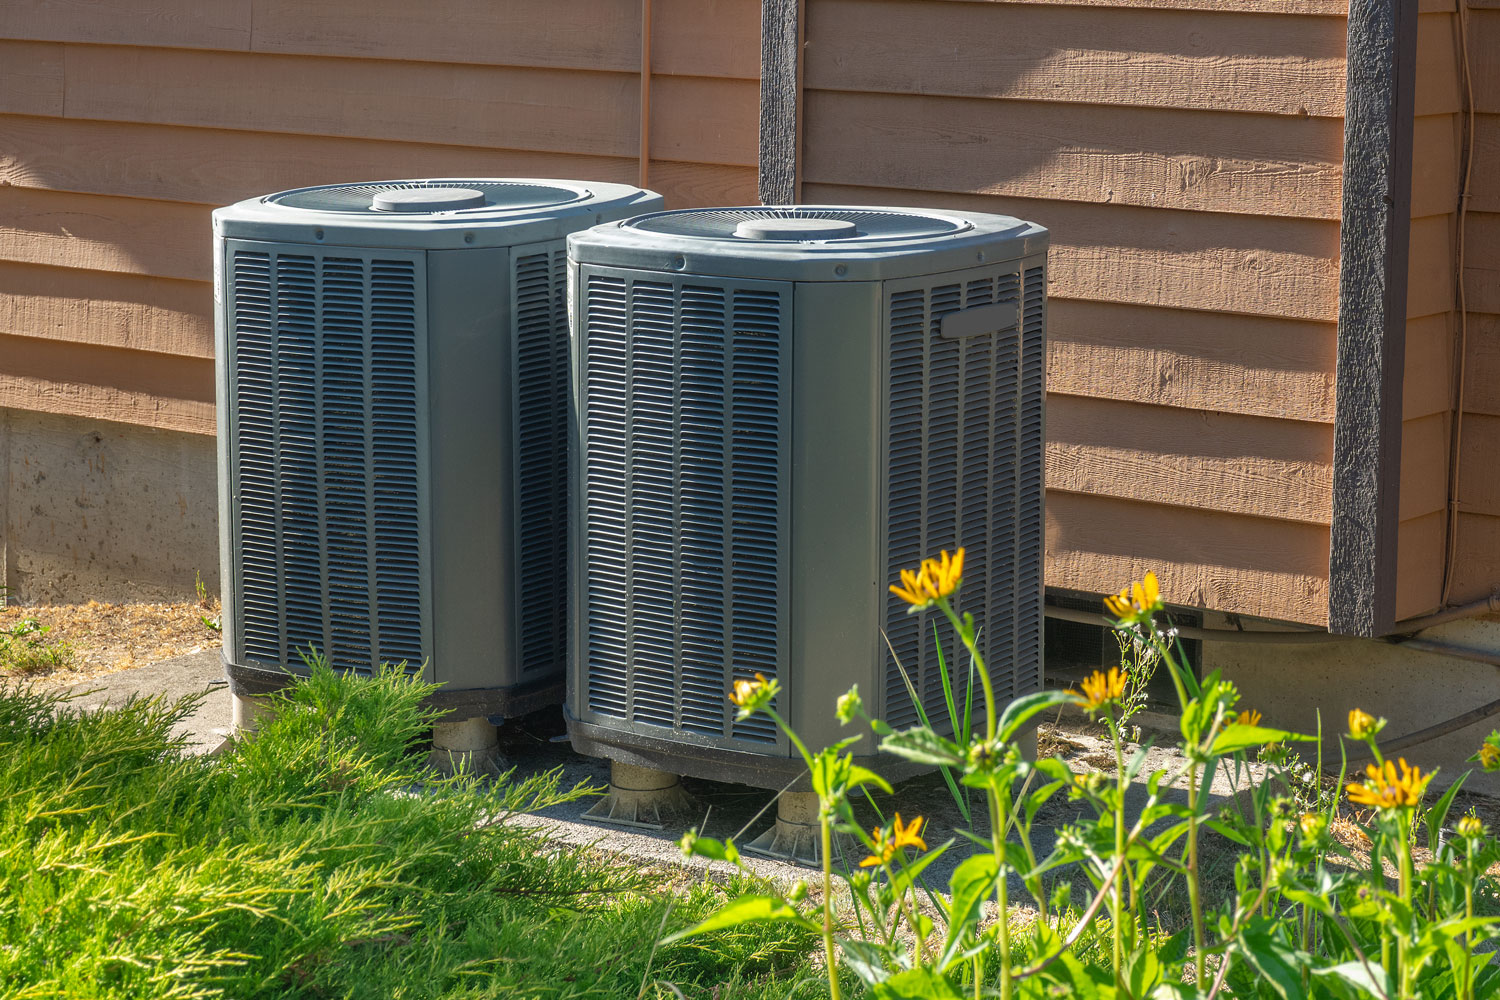 Gray Lennox air conditioning units outside the house